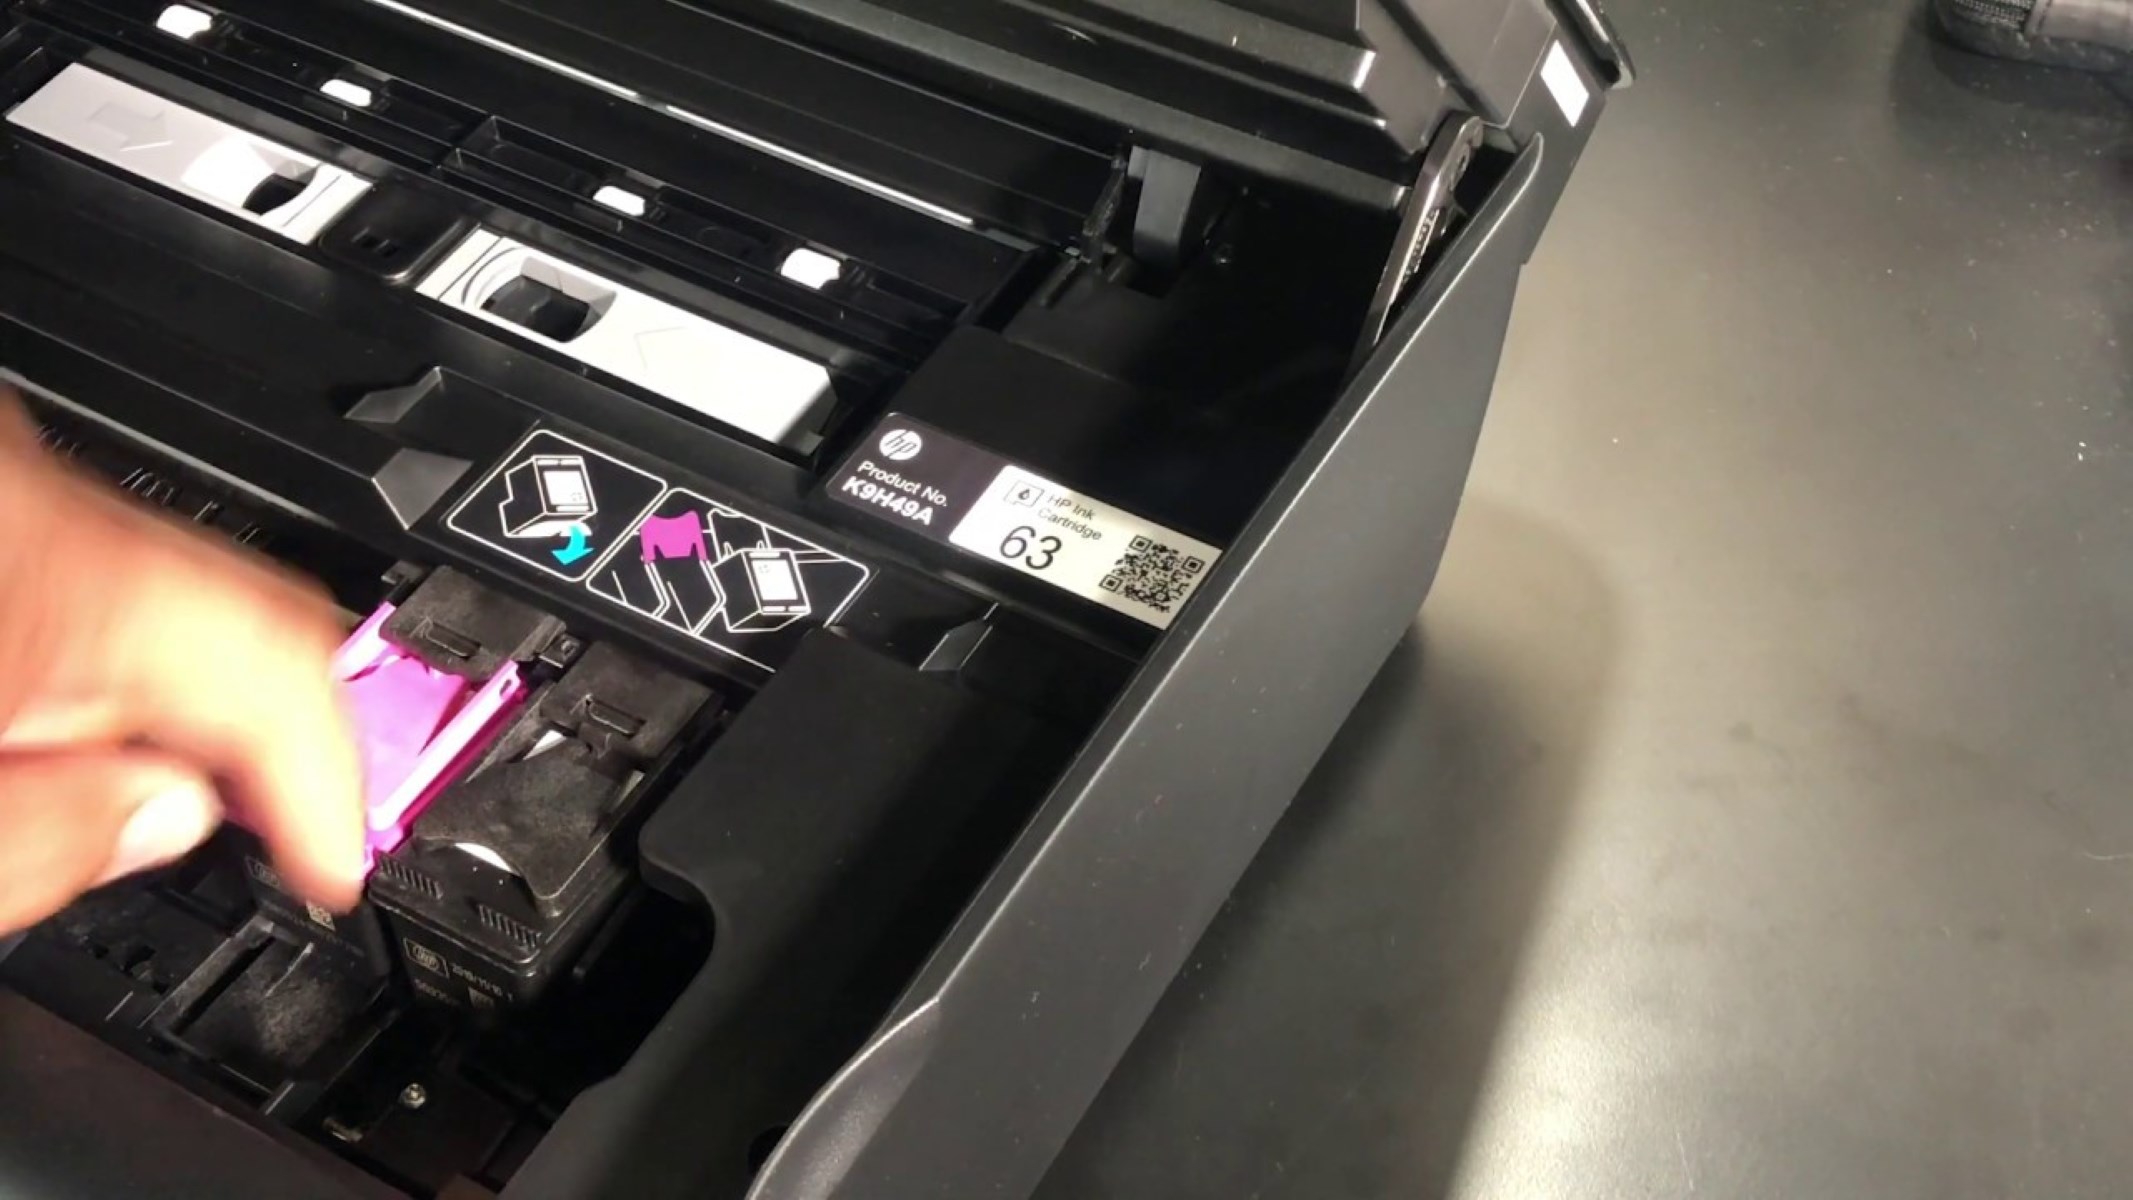 How To Put Ink Cartridge In HP Printer